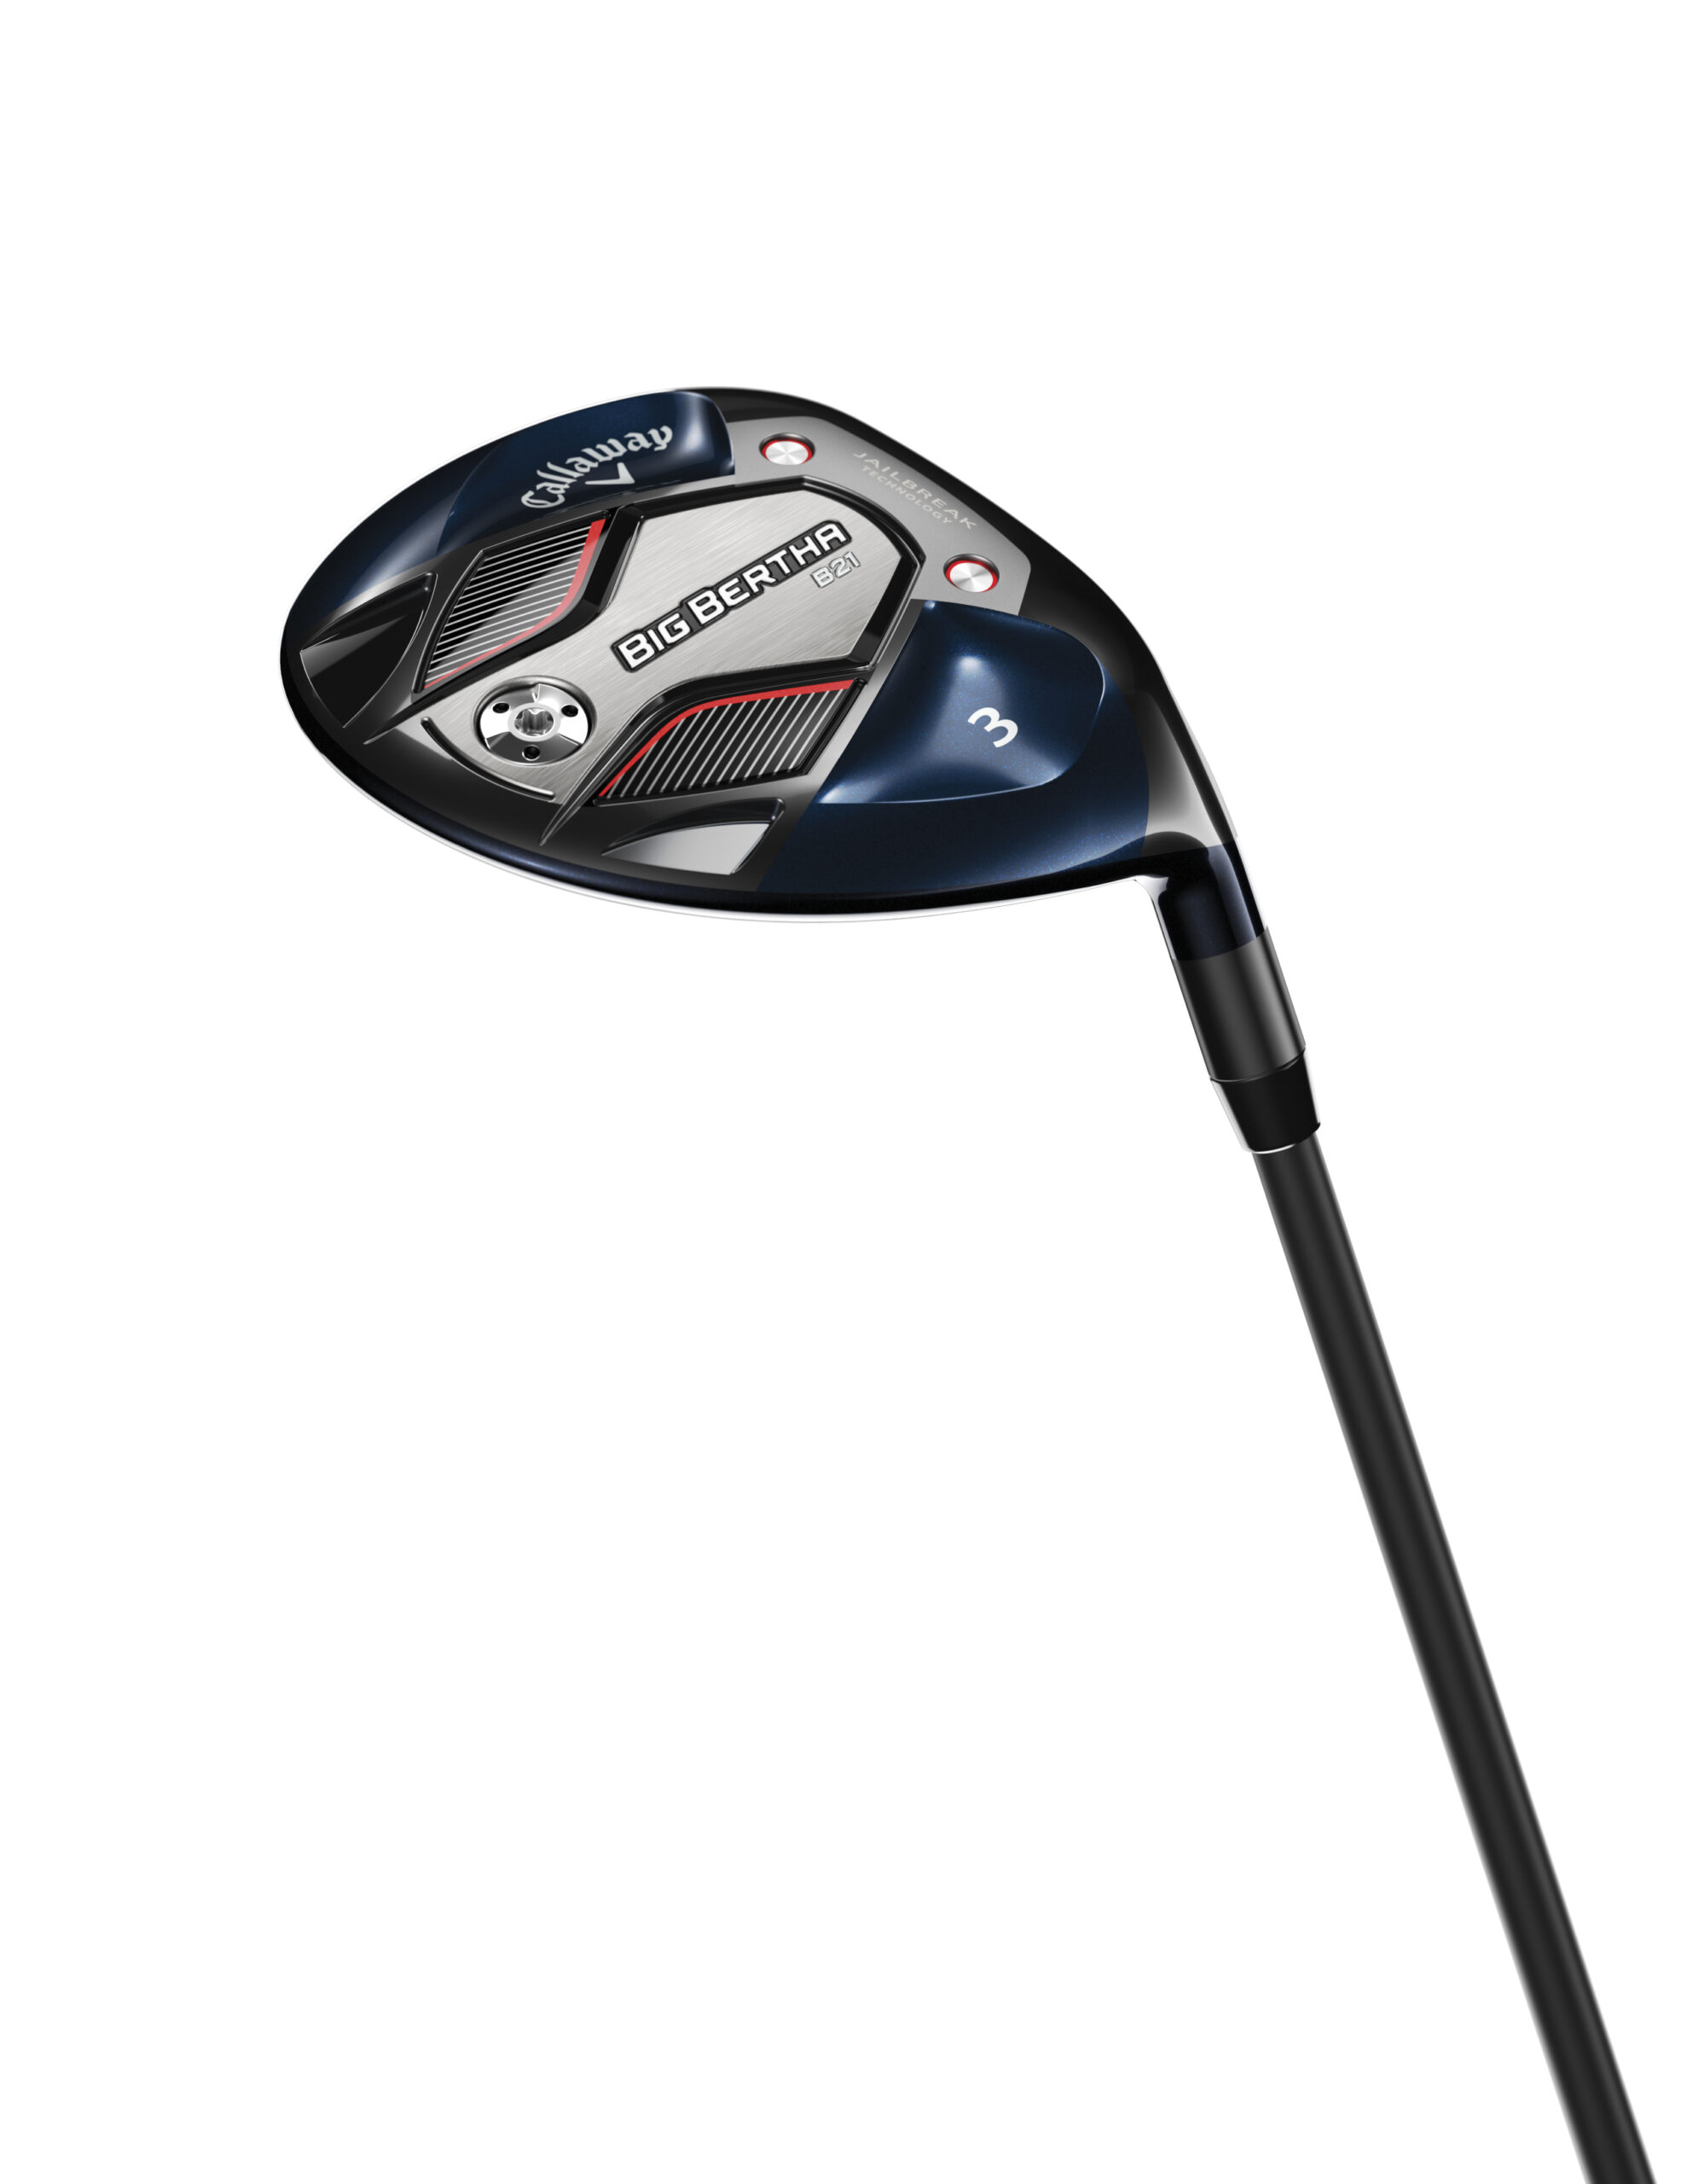 Callaway's Big Bertha gets an upgrade to go farther & straighter